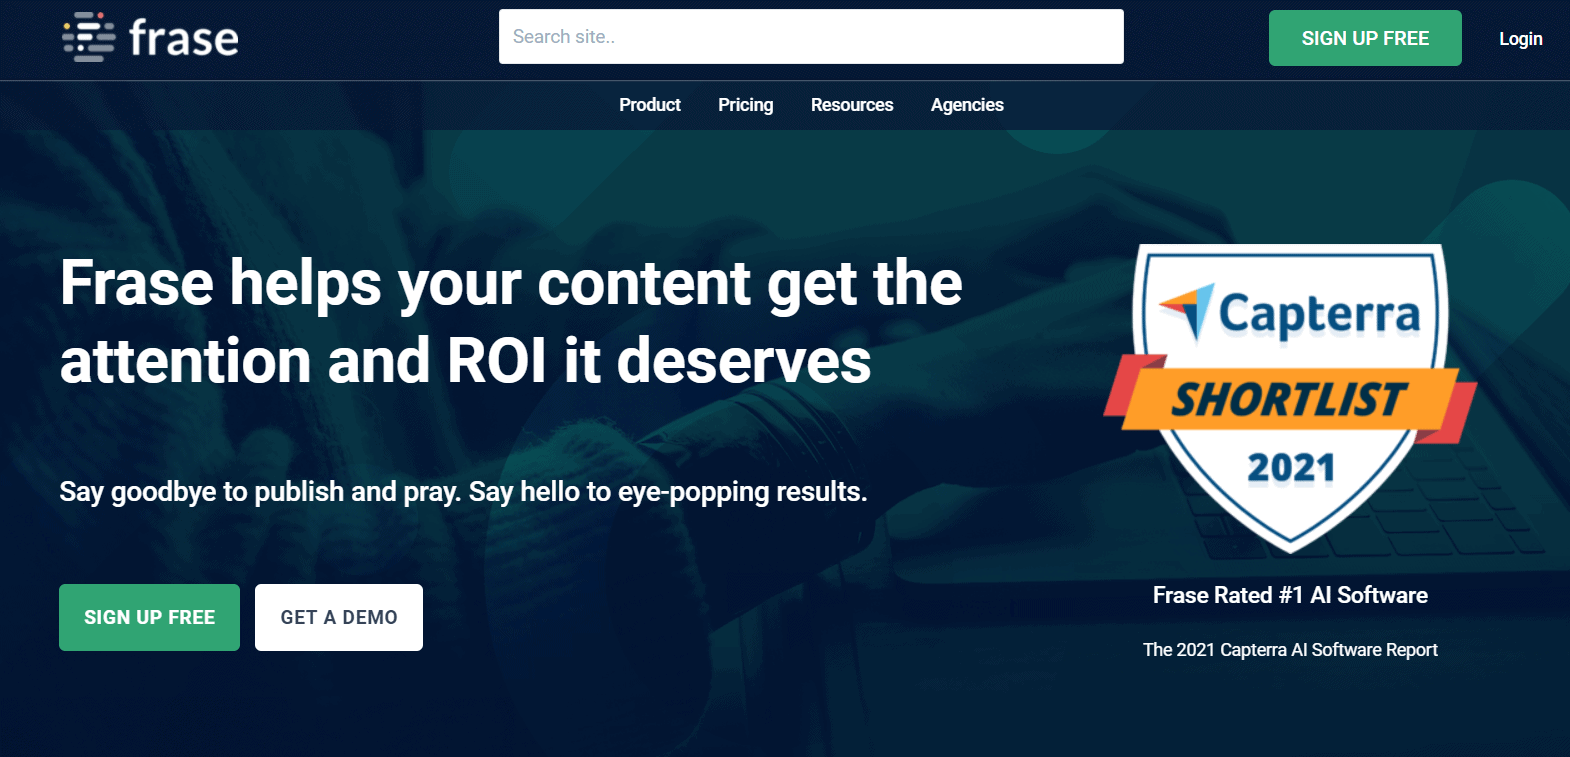 Frase Review 2021 - Best Content Optimization Tools